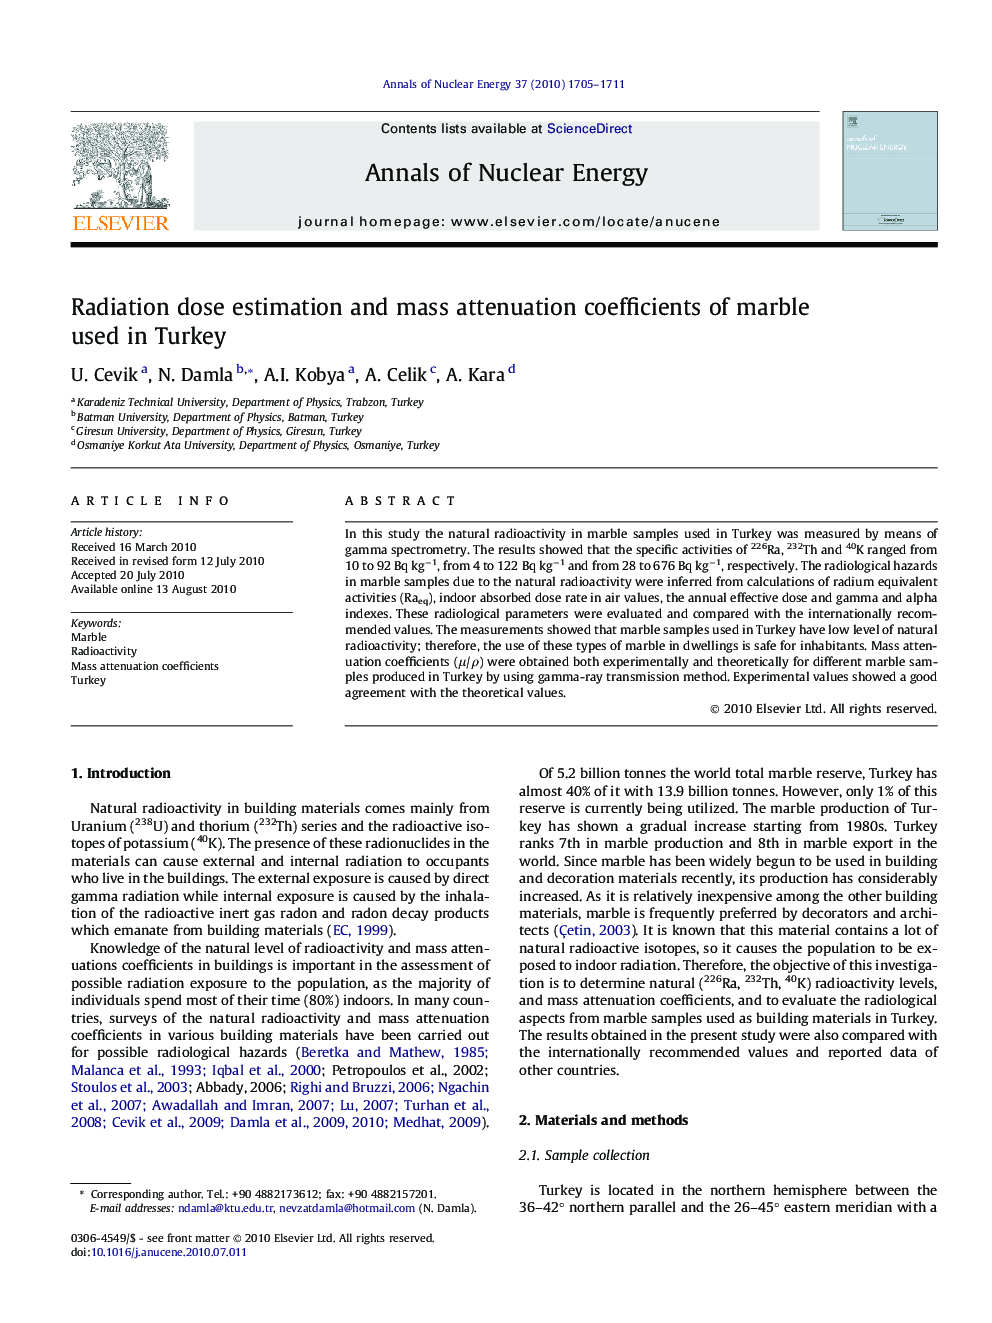 Radiation dose estimation and mass attenuation coefficients of marble used in Turkey